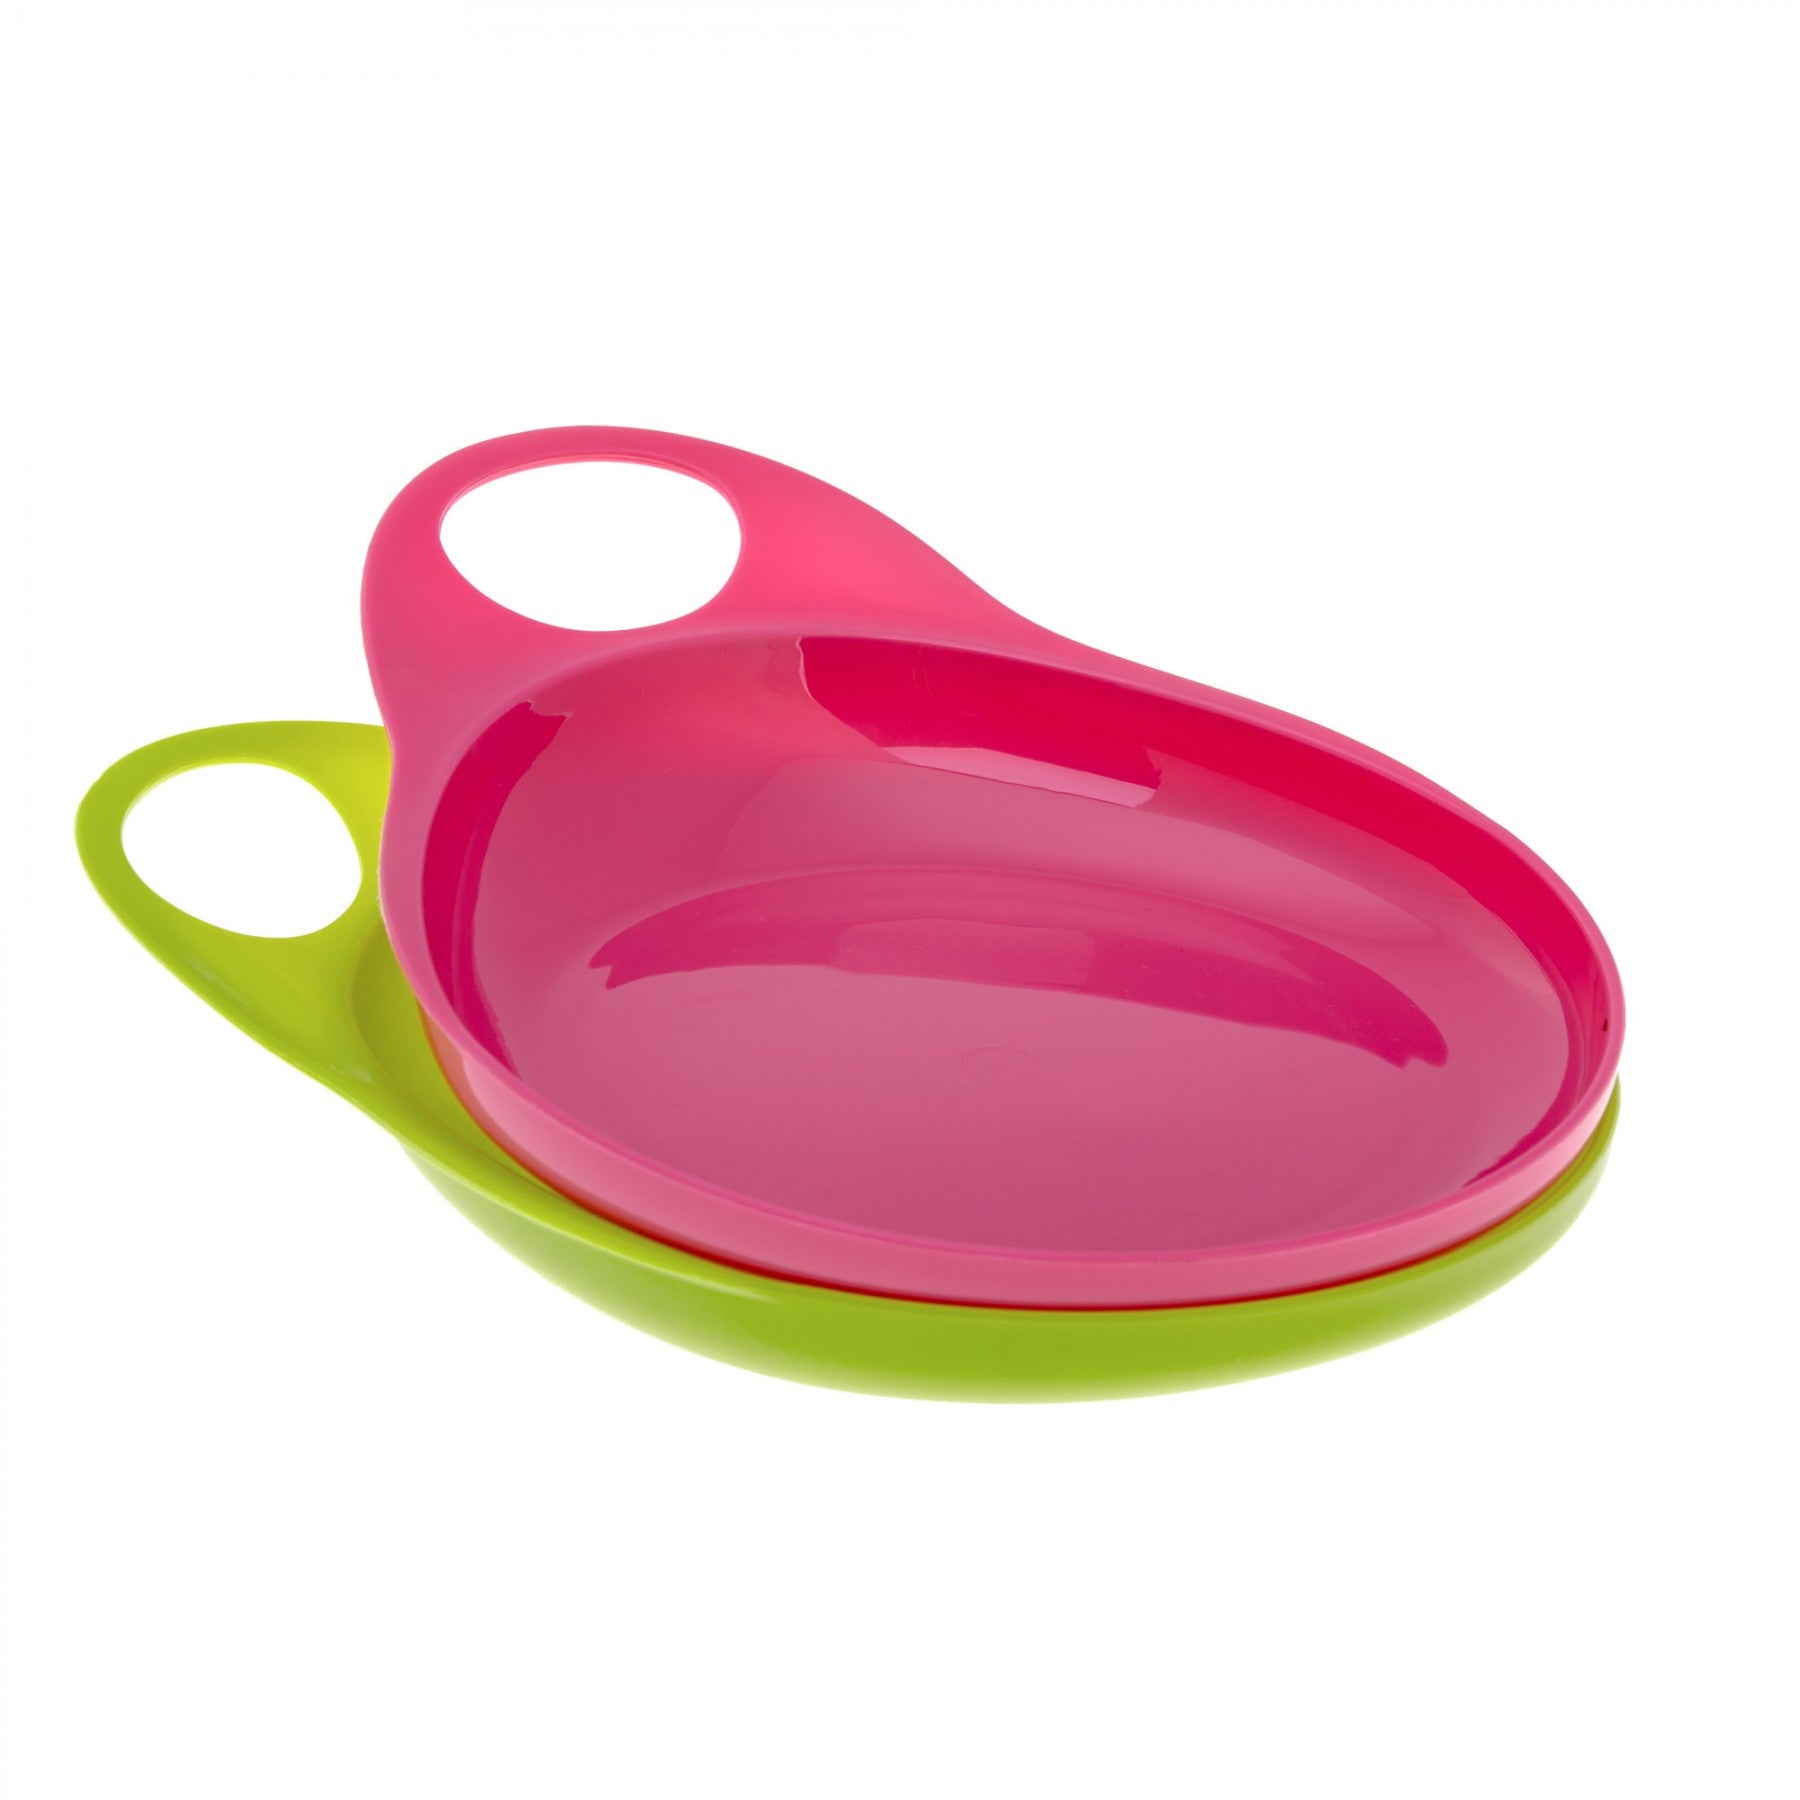 Brother Max - 2 Easy-Hold Plates (Pink/ Green)